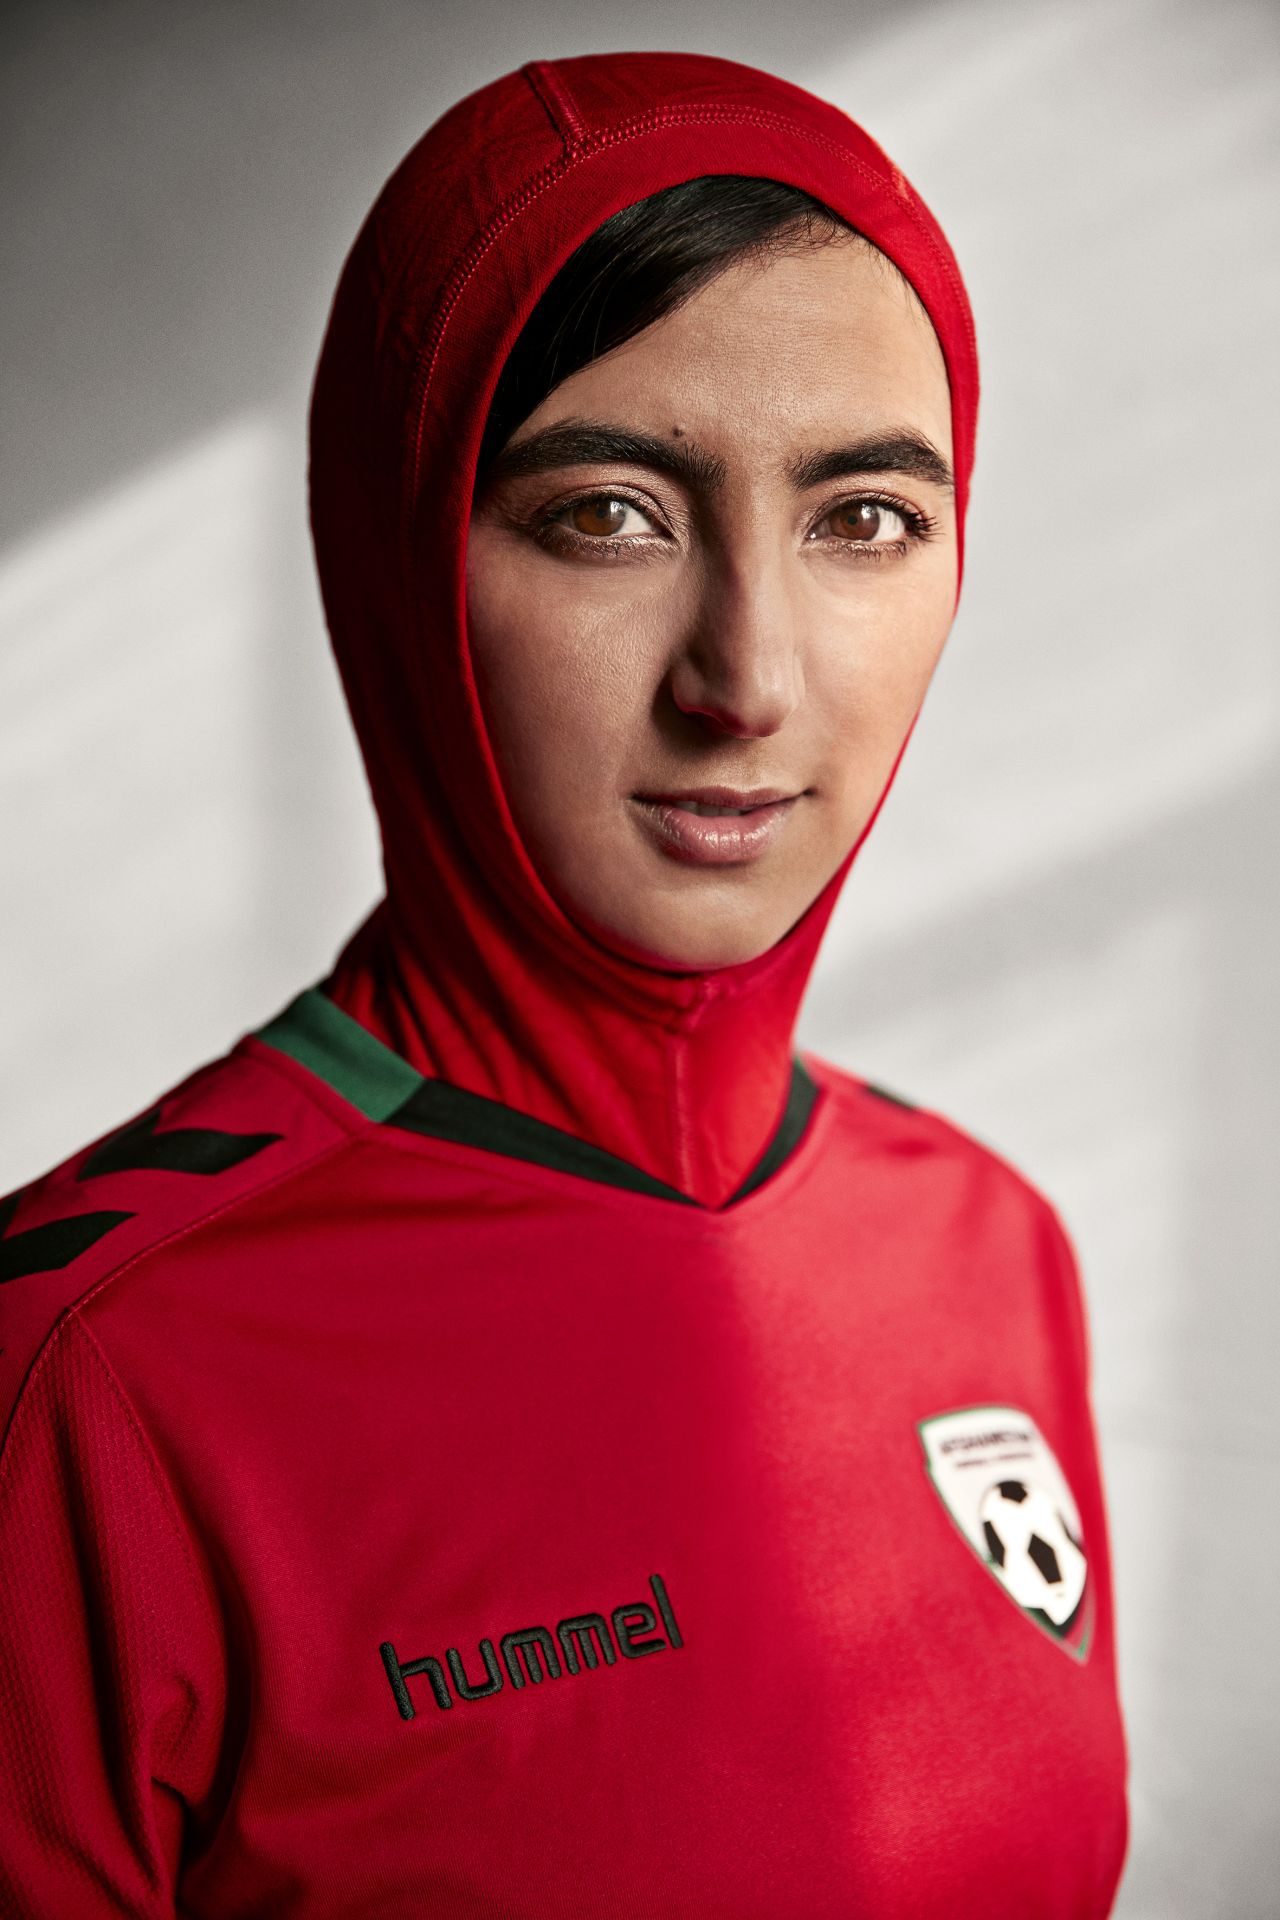 The jersey was modeled by Khalida Popal, a former captain of the Afghan women's team who was forced to retire due to a knee injury. 